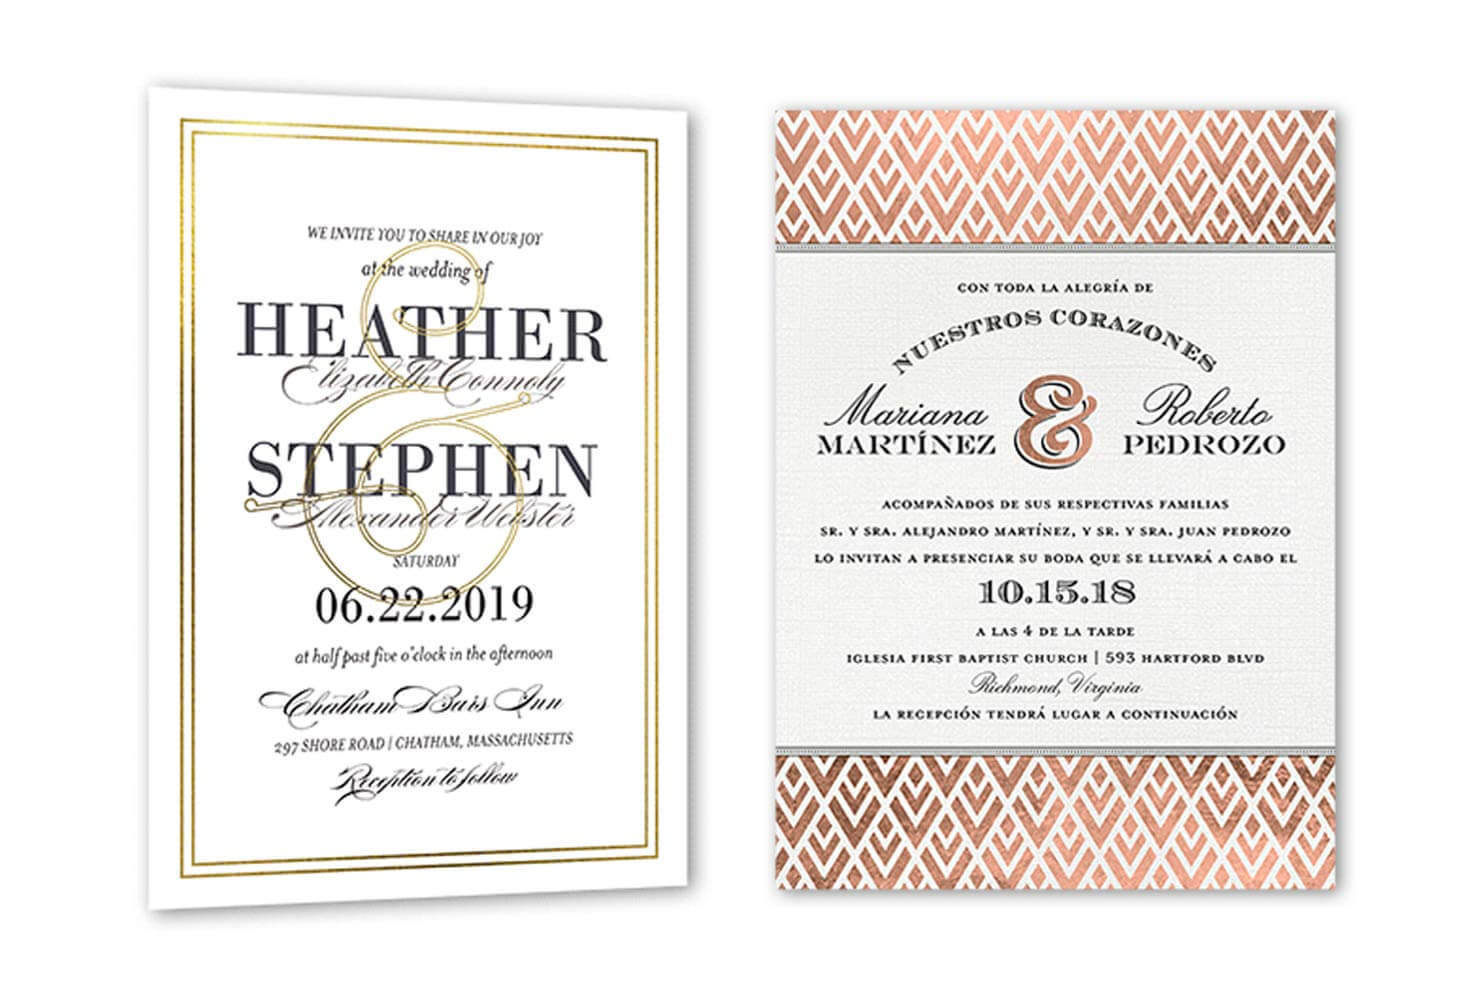 35+ Wedding Invitation Wording Examples 2020 | Shutterfly Throughout Church Wedding Invitation Card Template